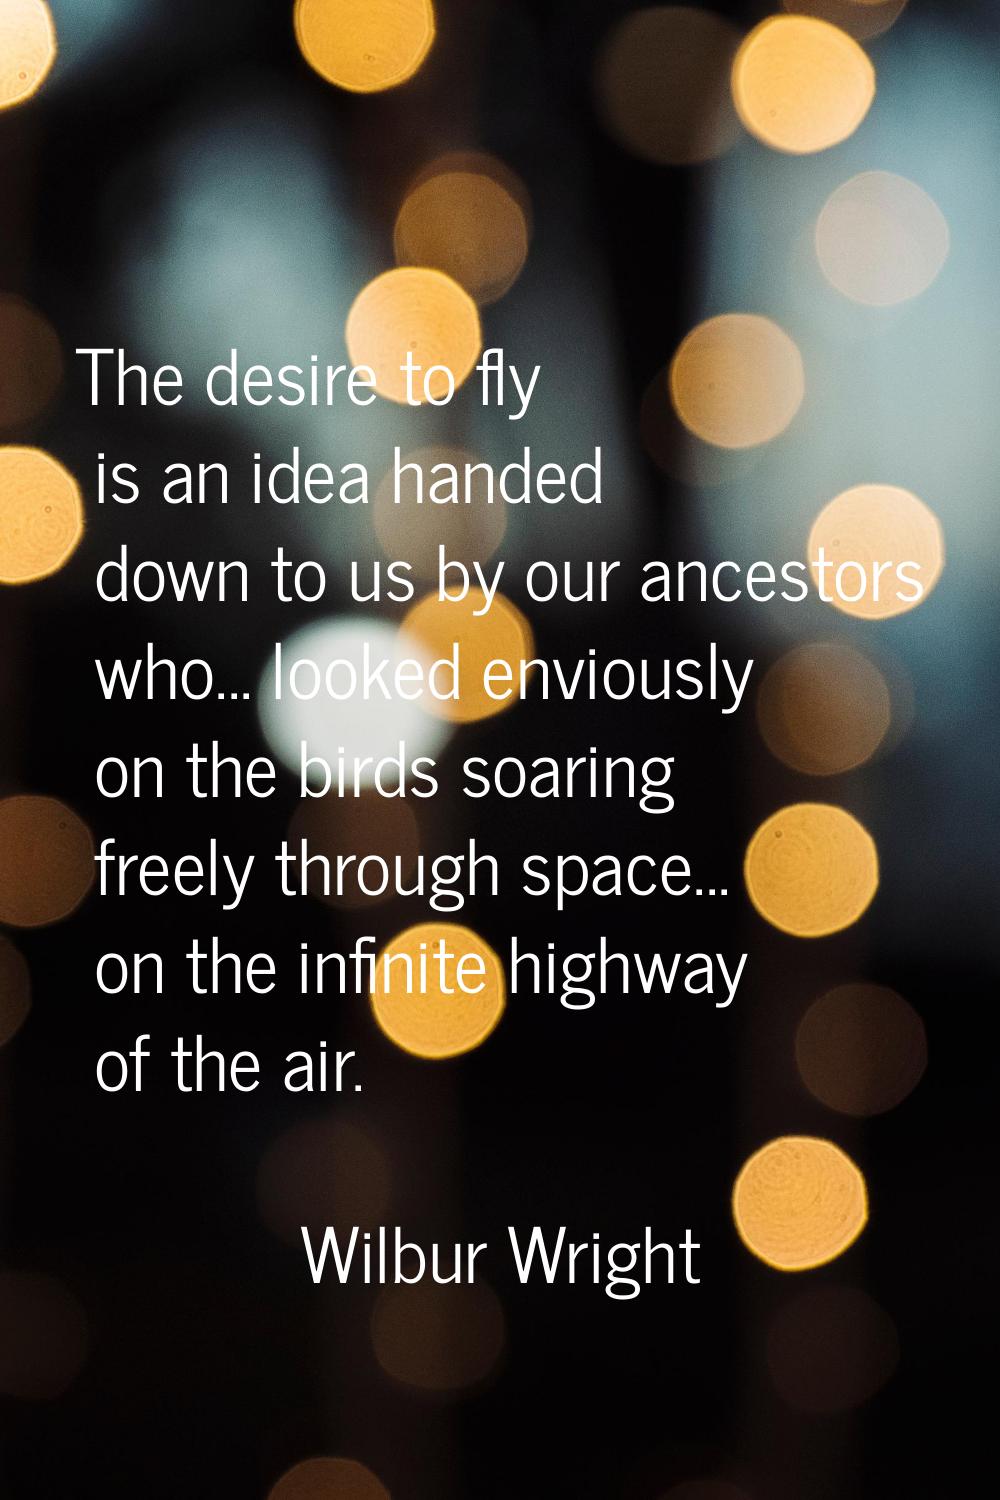 The desire to fly is an idea handed down to us by our ancestors who... looked enviously on the bird